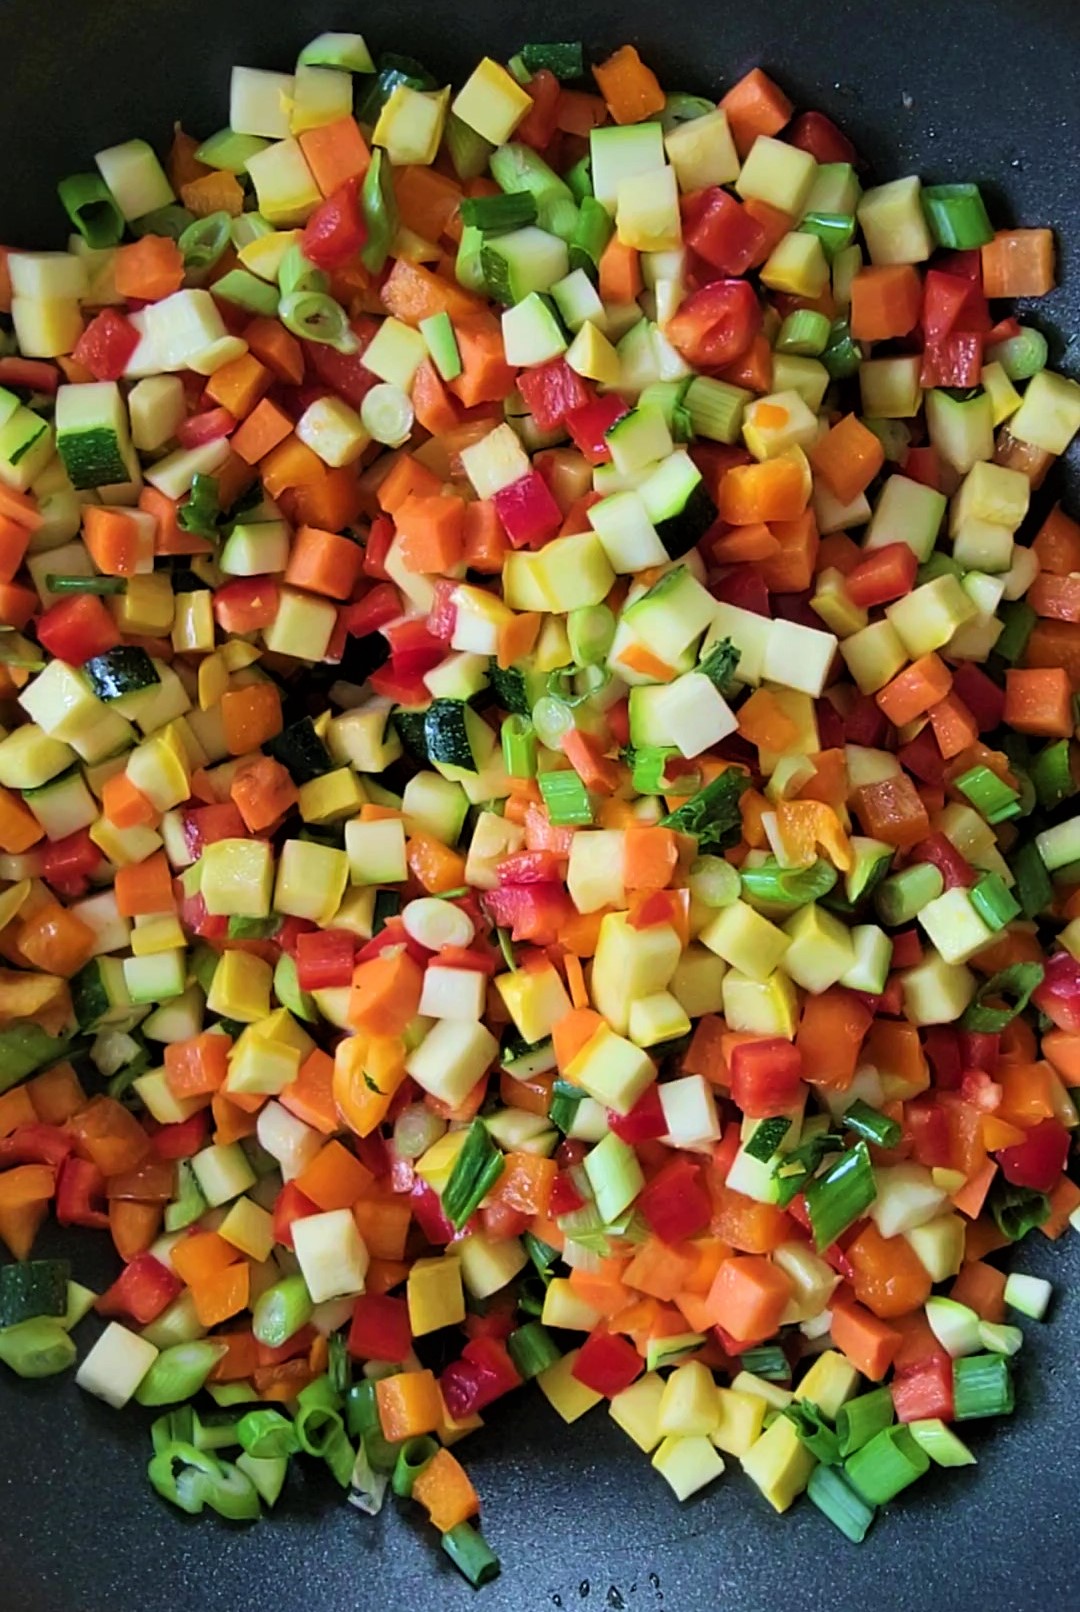 Check out all the colors of the vegetables in the Garden Fresh Confetti Quinoa.